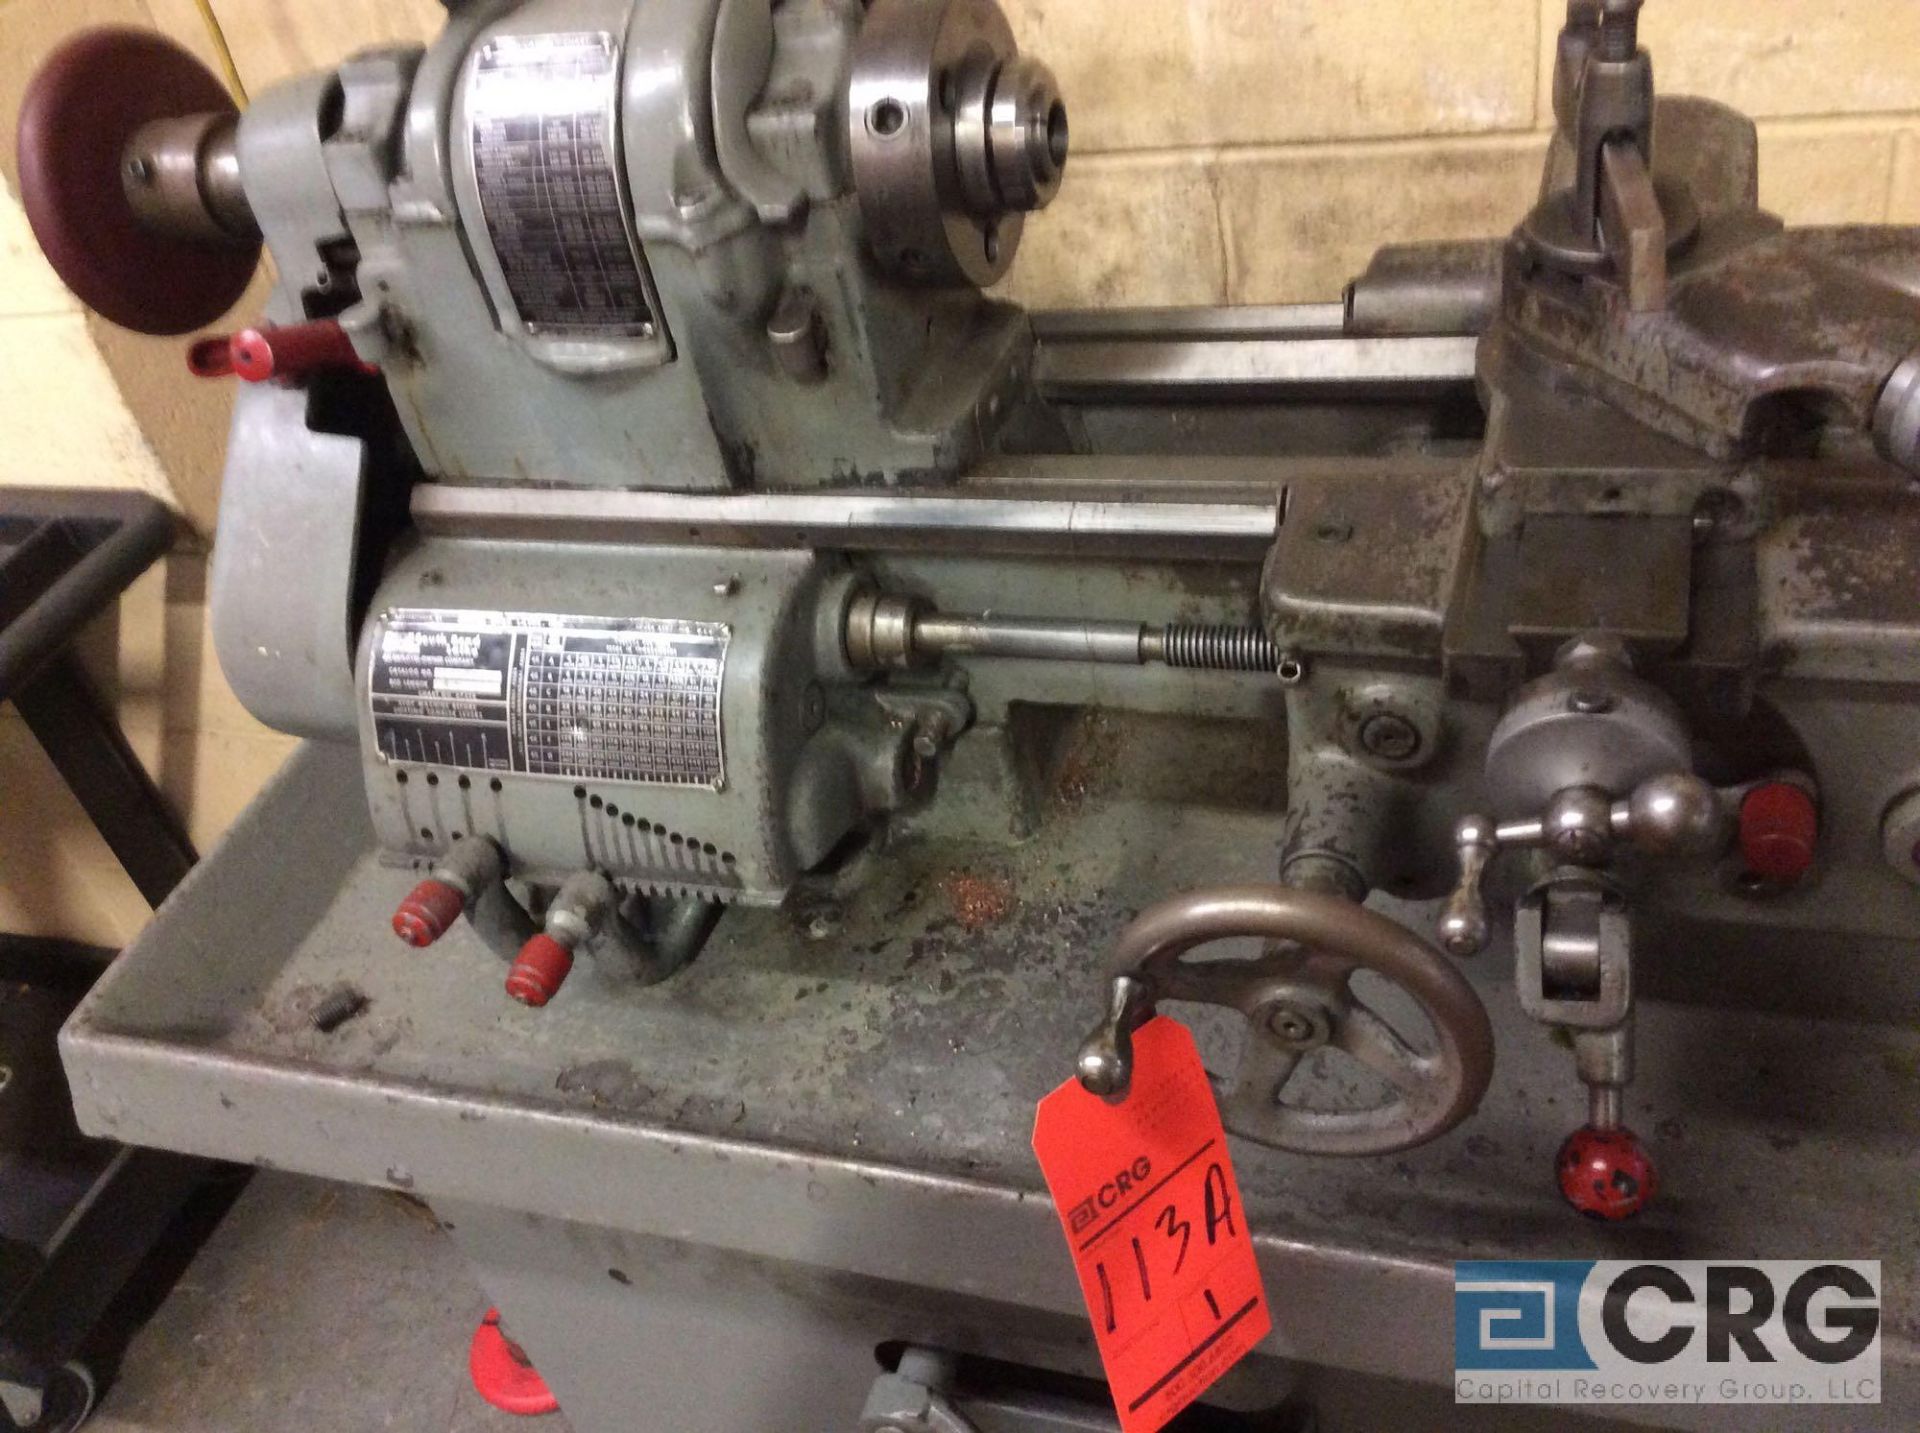 South bend tool room lathe, model CL0187RB, serial 22583R, 11 inch x 38 inch BC, compound slide - Image 2 of 6